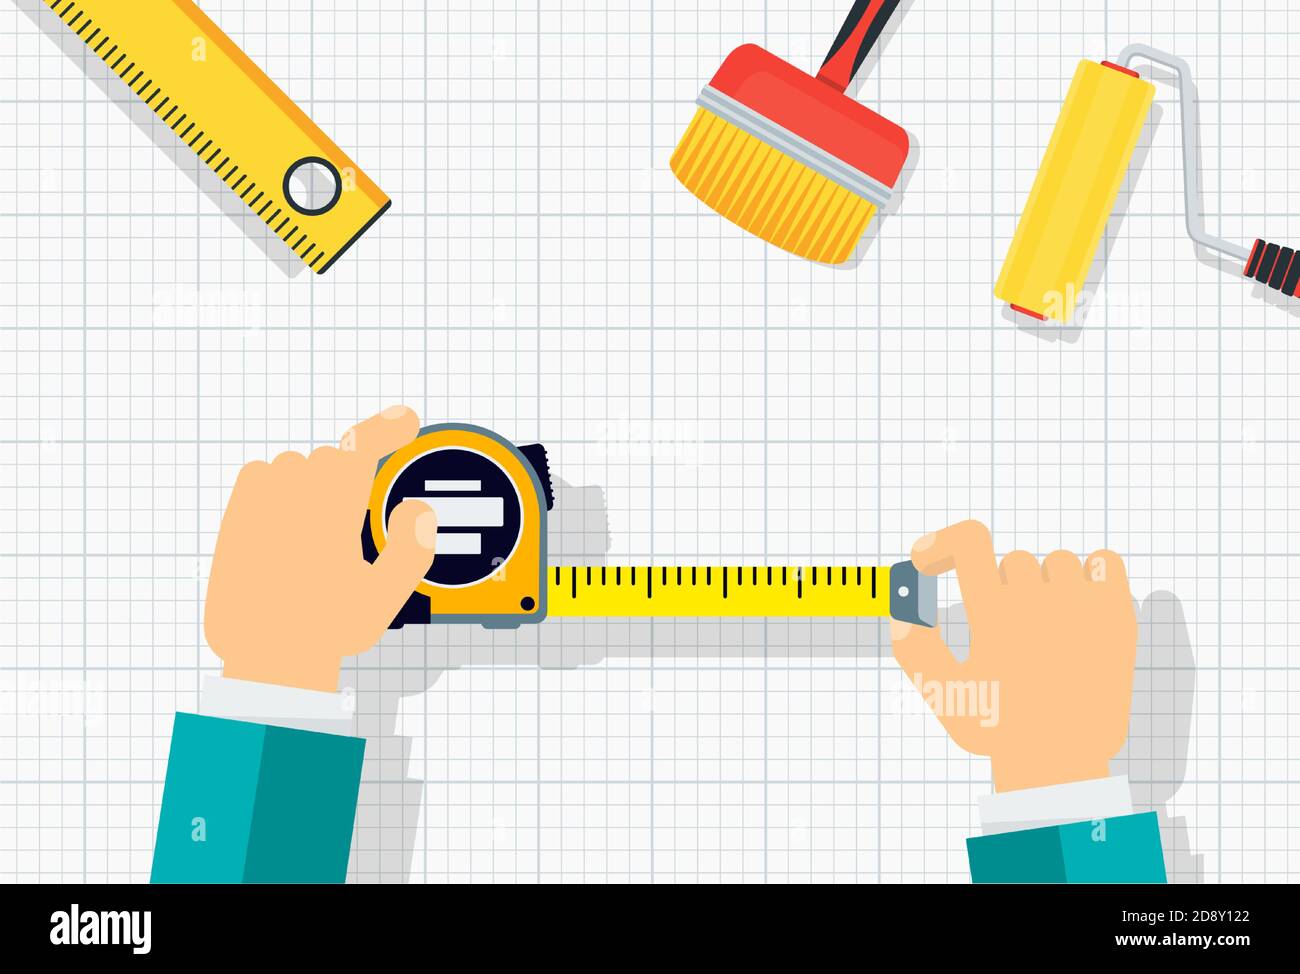 Measuring tape in the hands of a man. Template for a poster. Stock Vector